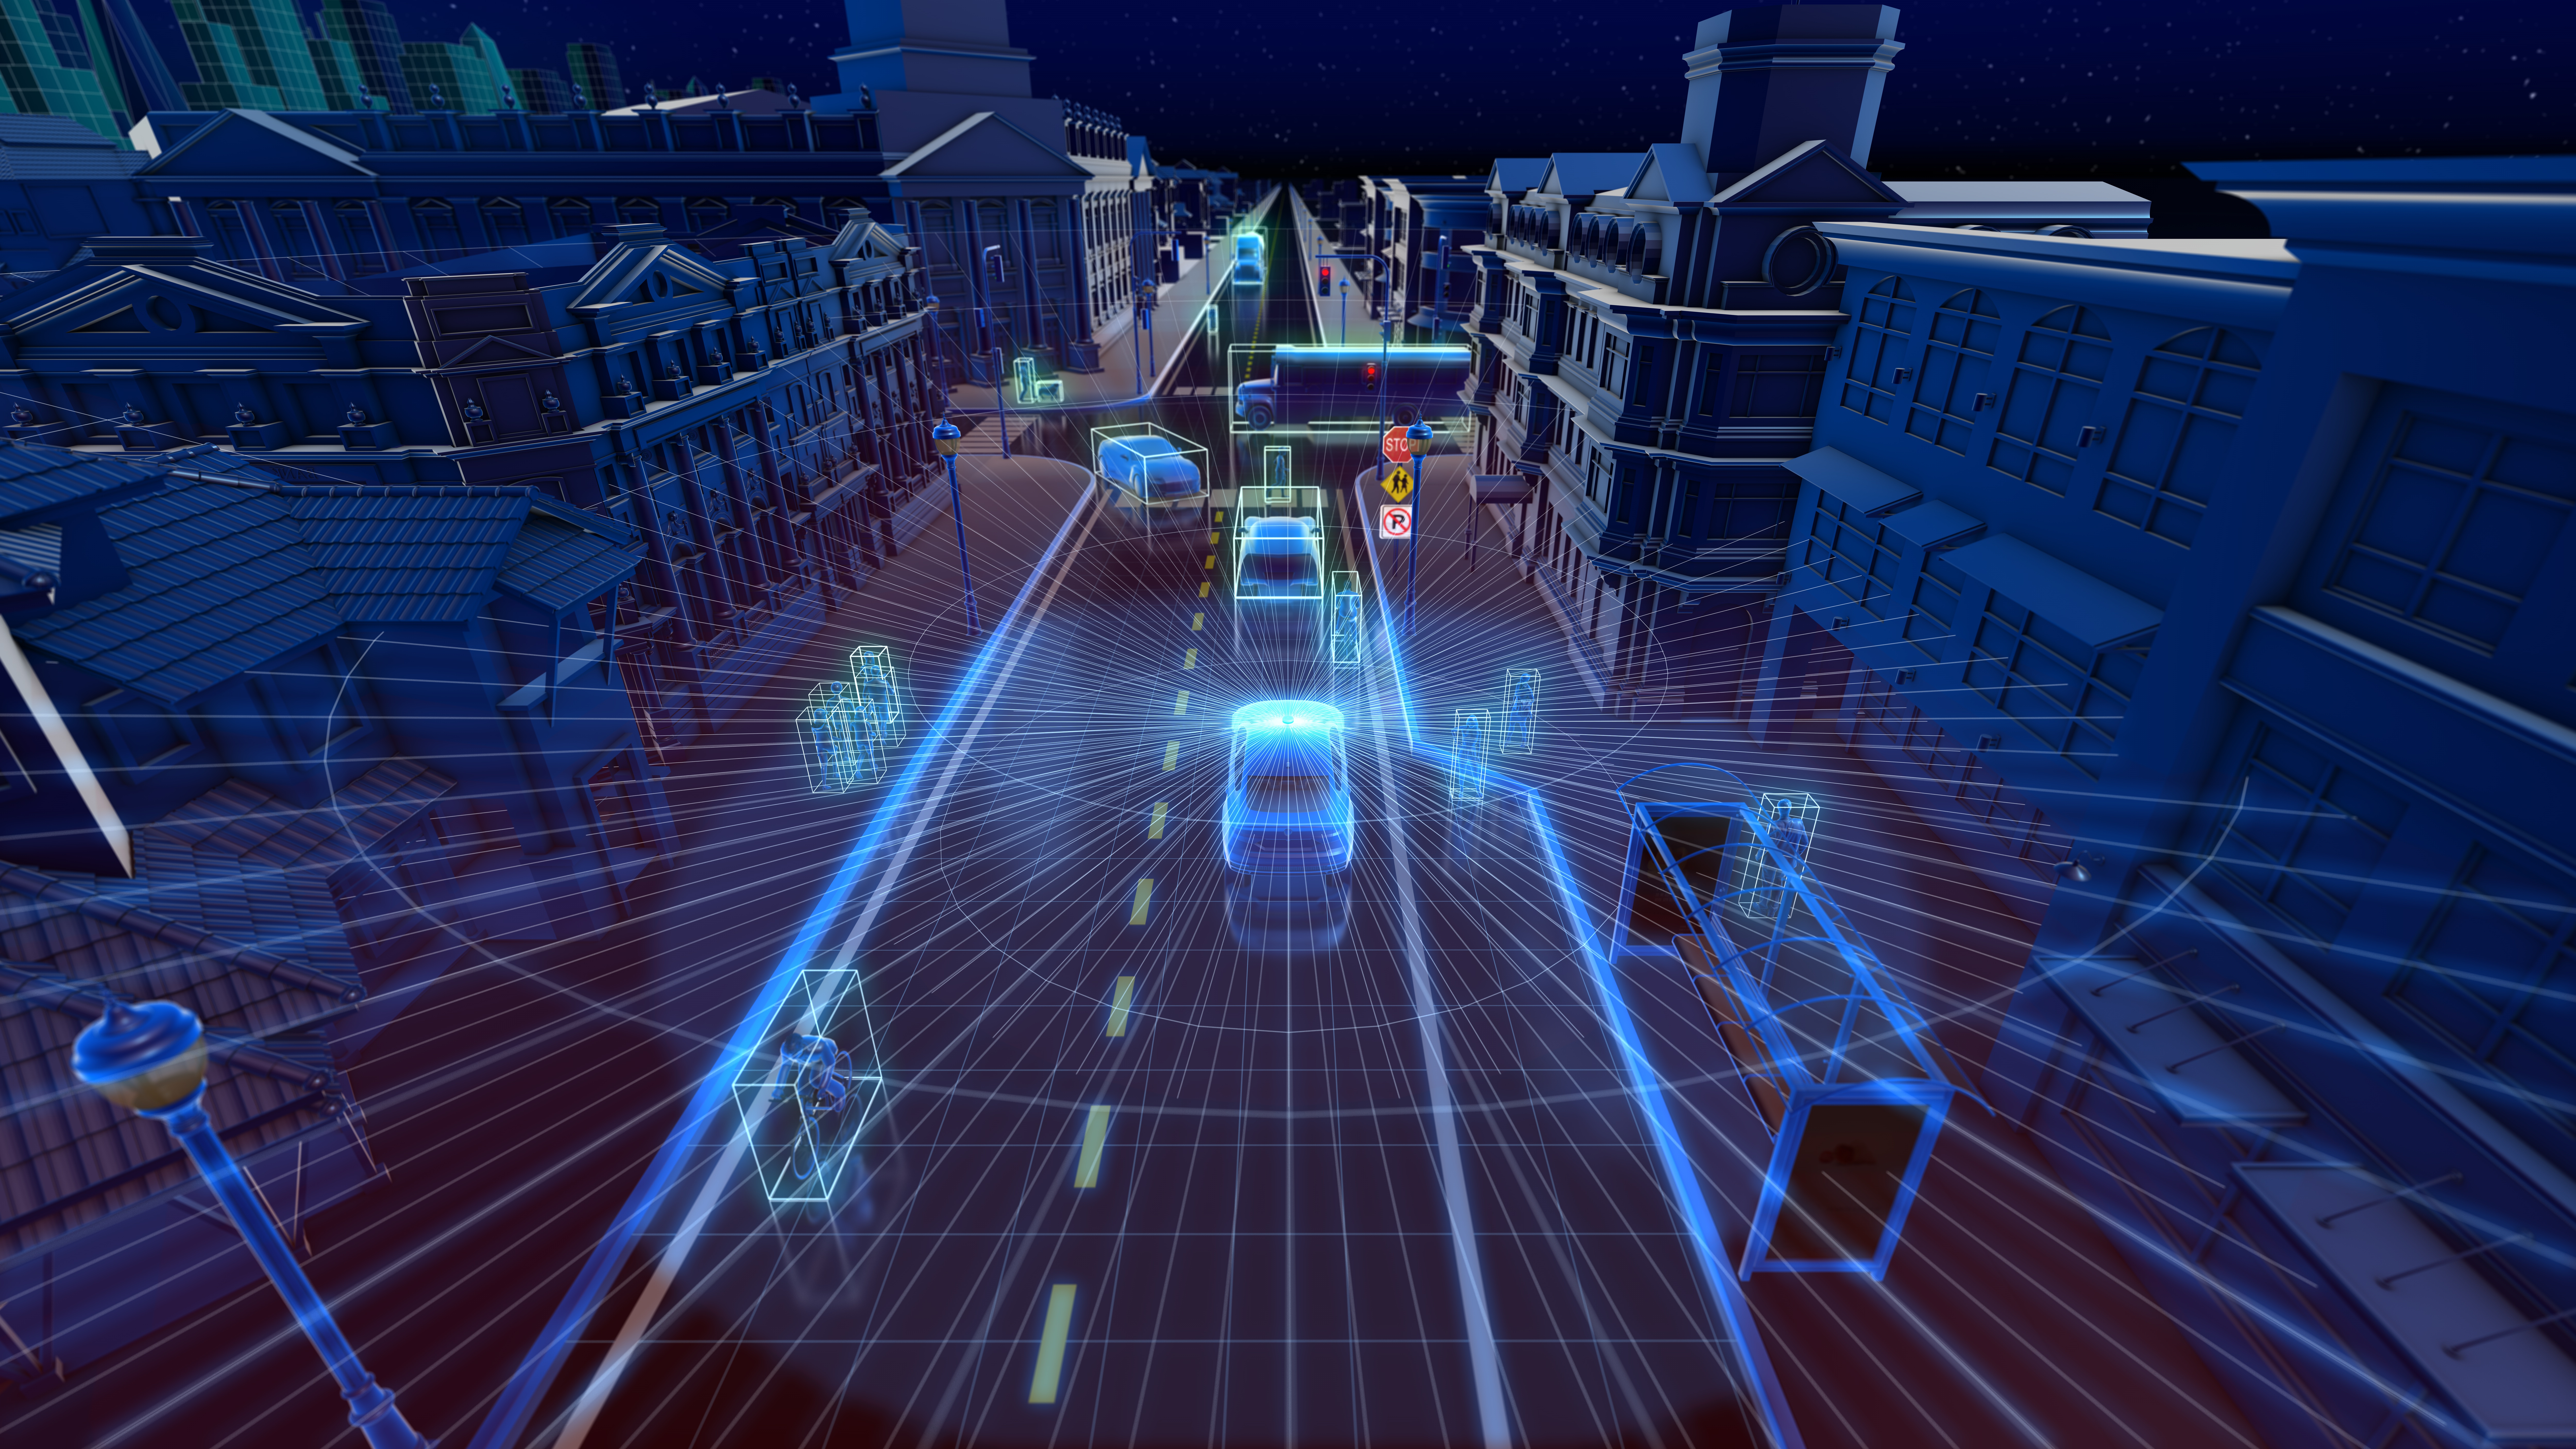 Velodyne Lidar provides smart, powerful lidar solutions for autonomous vehicles, driver assistance, intelligent transportation systems and more.